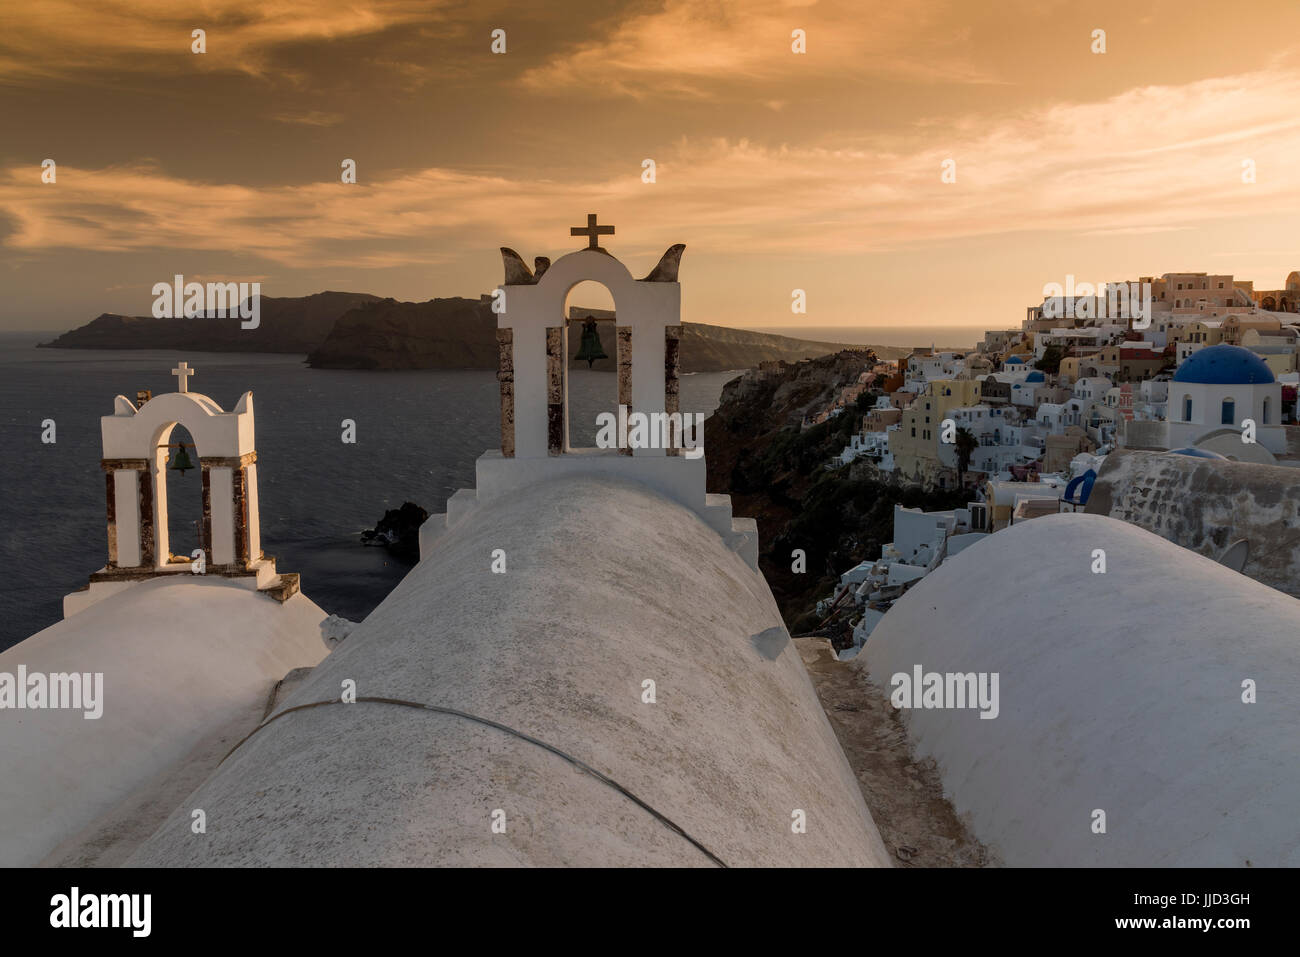 Sunset view with traditional Greek belfries and Oia in the background, Santorini, South Aegean, Greece Stock Photo